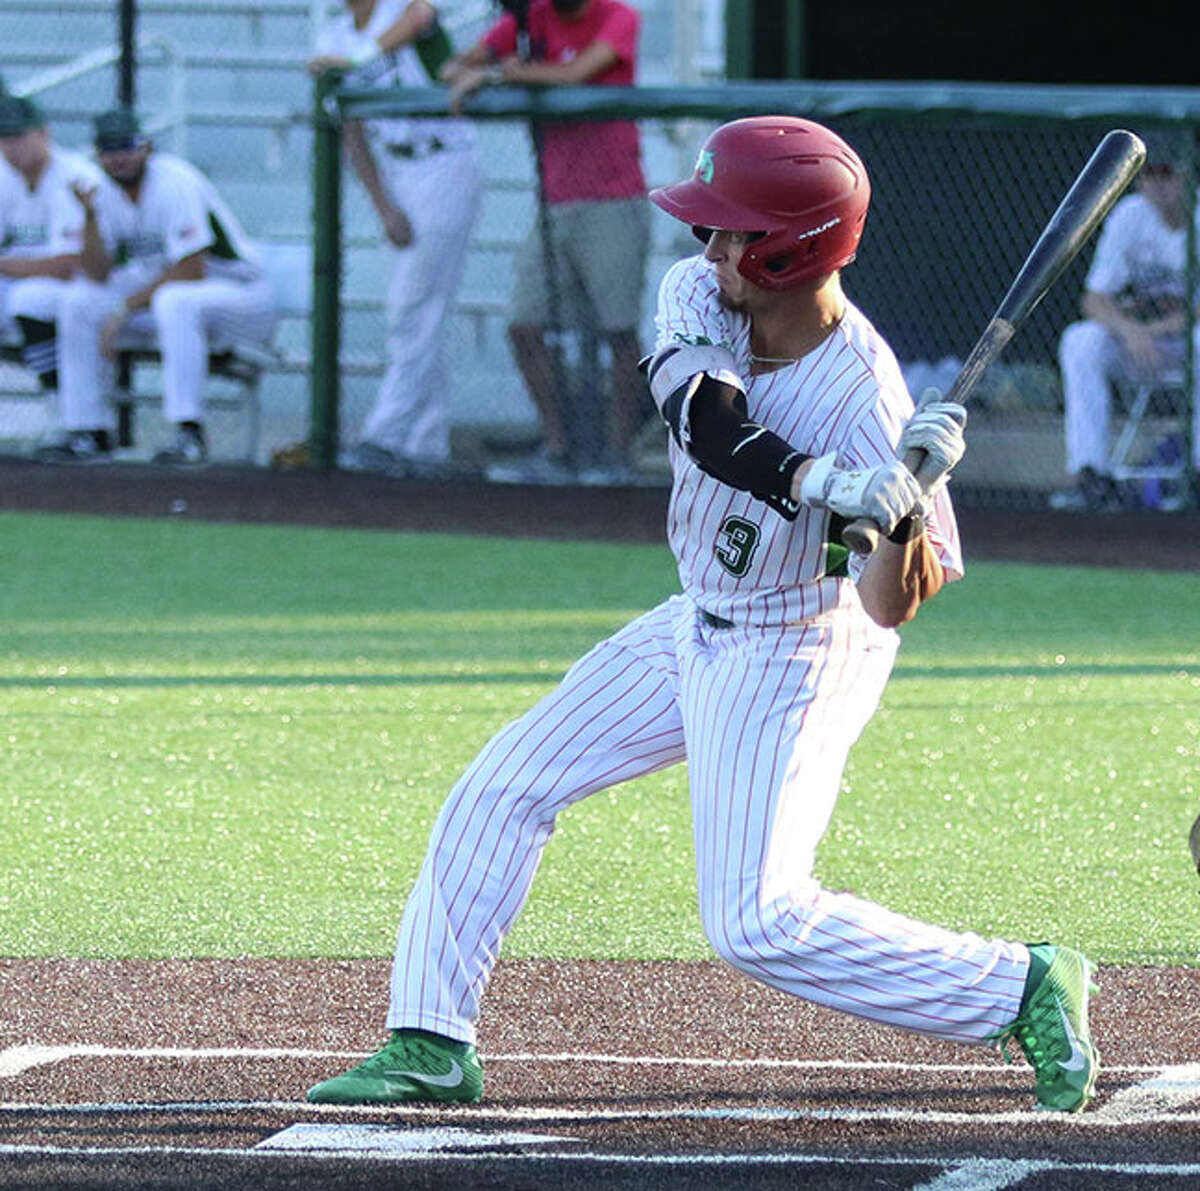 The River Dragons' Mike Hampton, an Alton High grad, had a home run and three RBI on Monday night in the Dragons' win over Quincy at Hopkins Field in Alton.